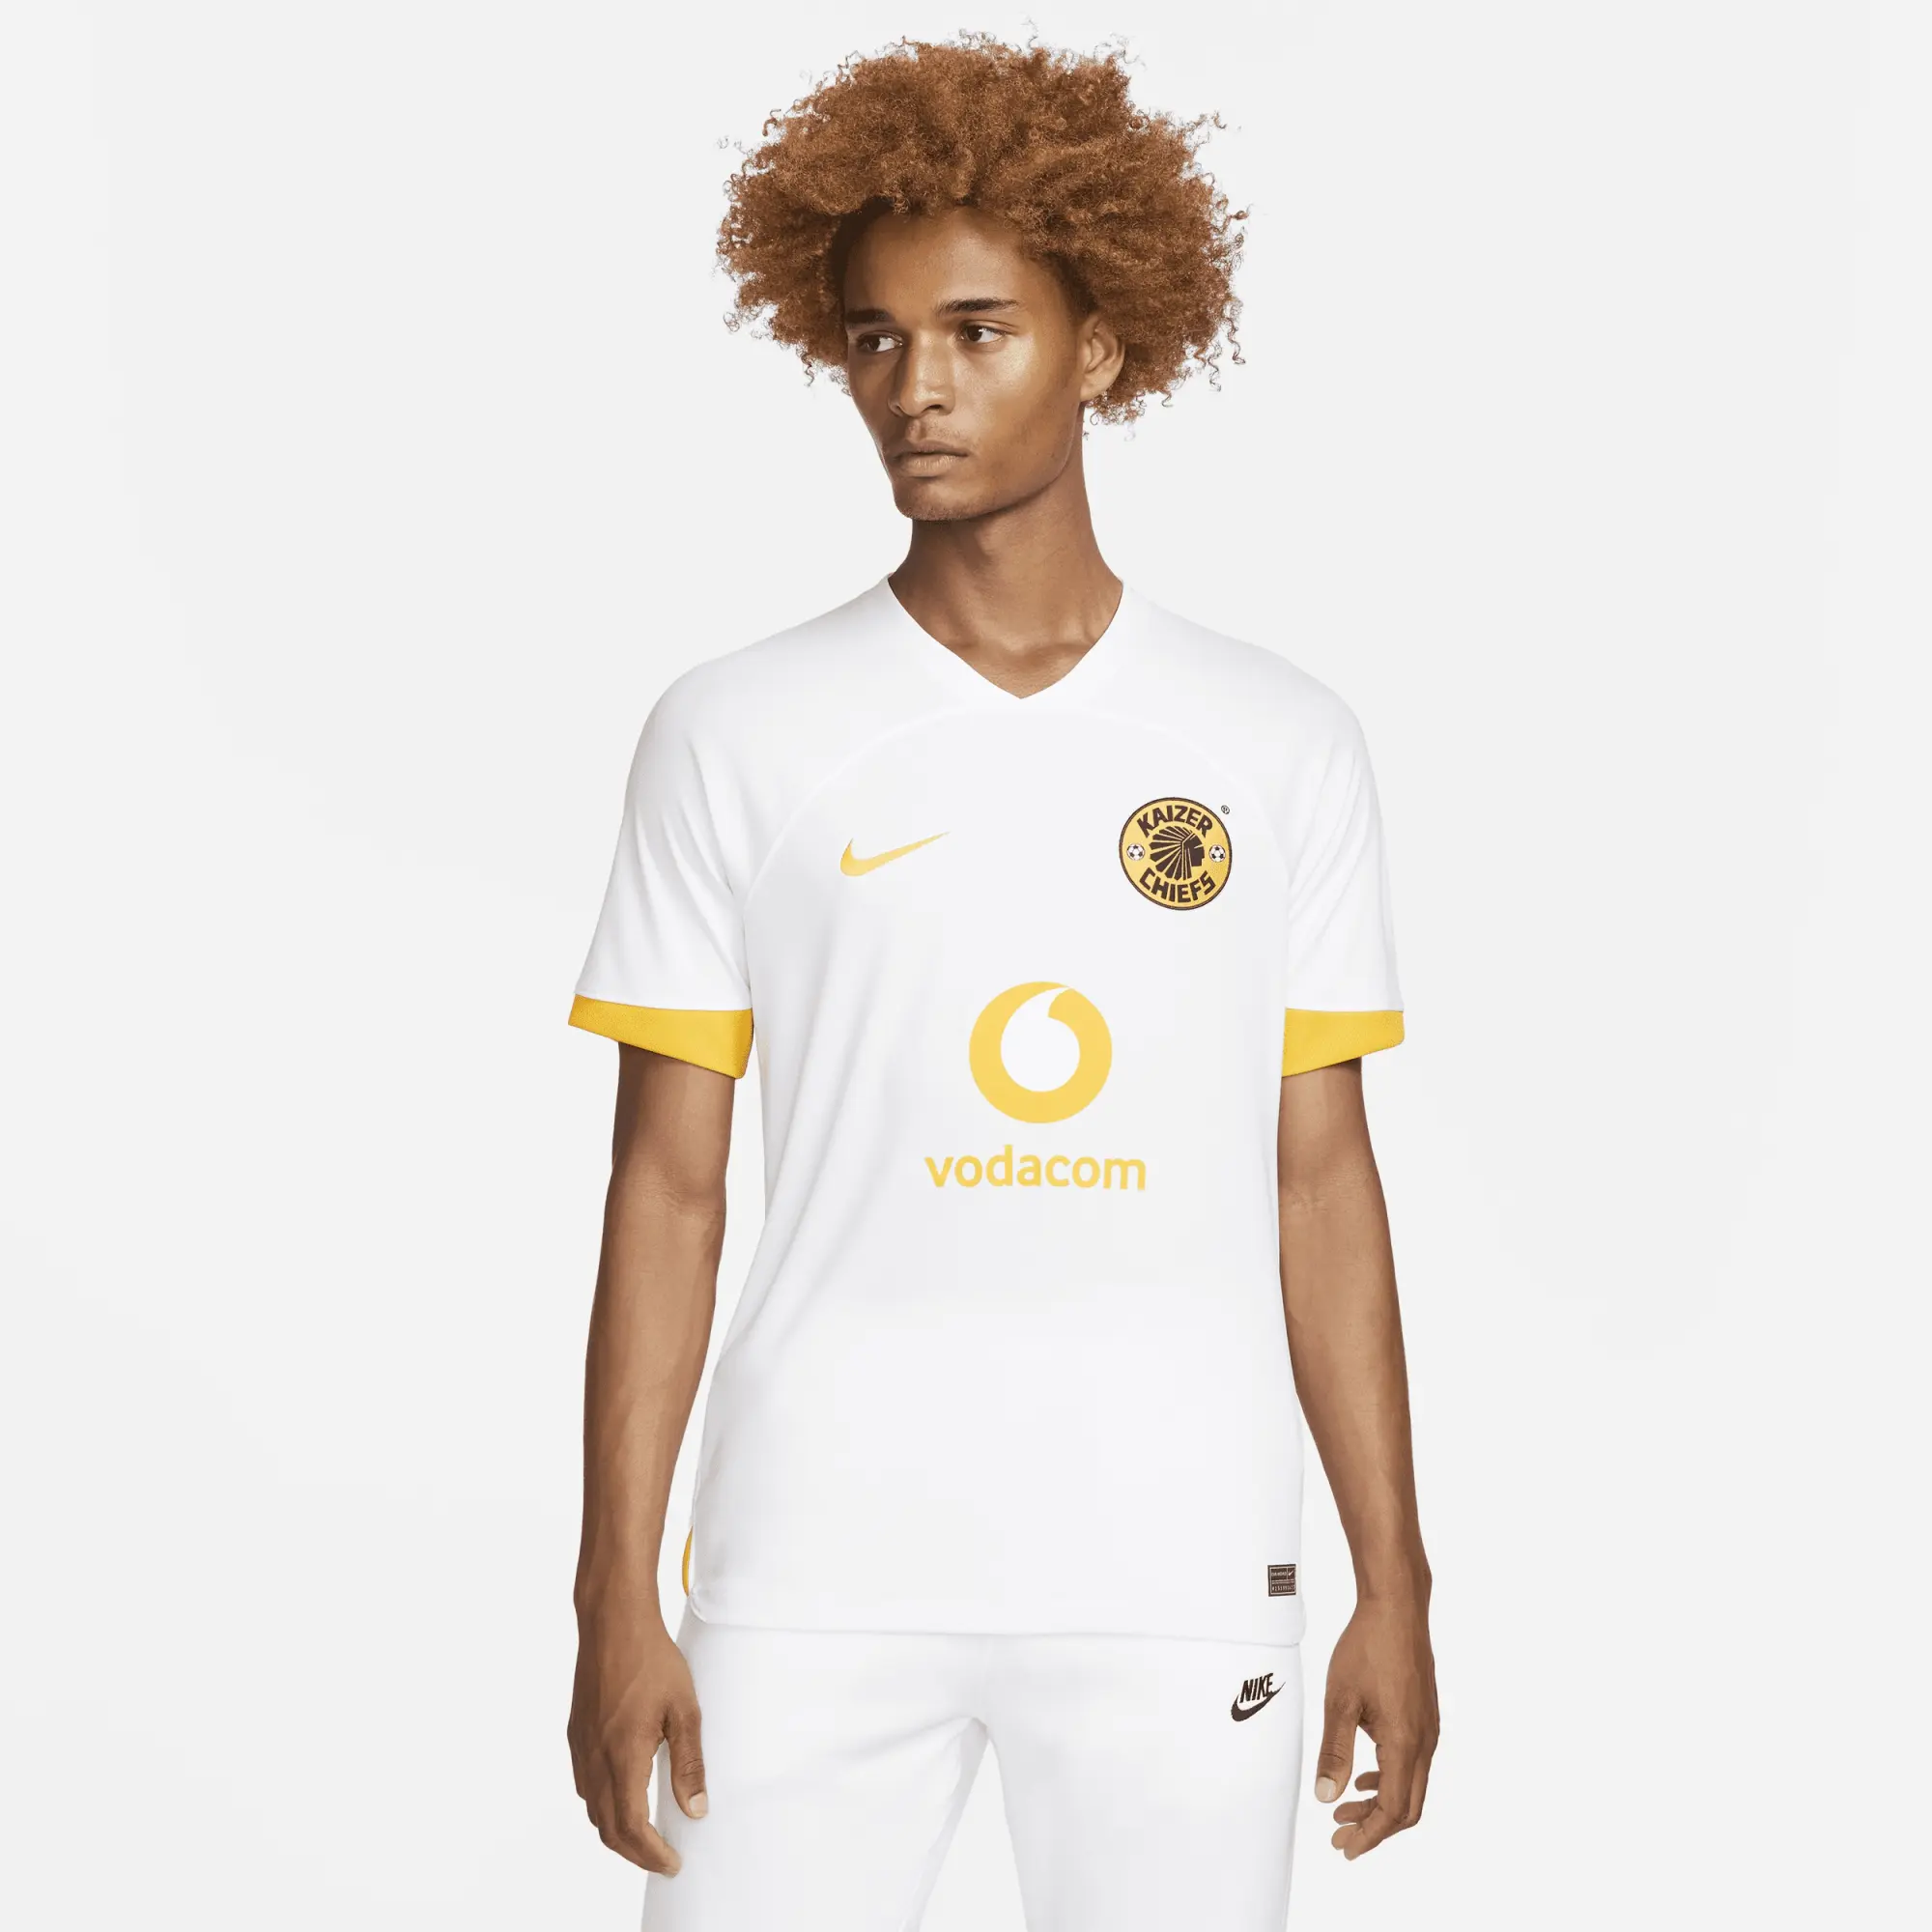 Kaizer Chiefs and Kappa join forces for new kit